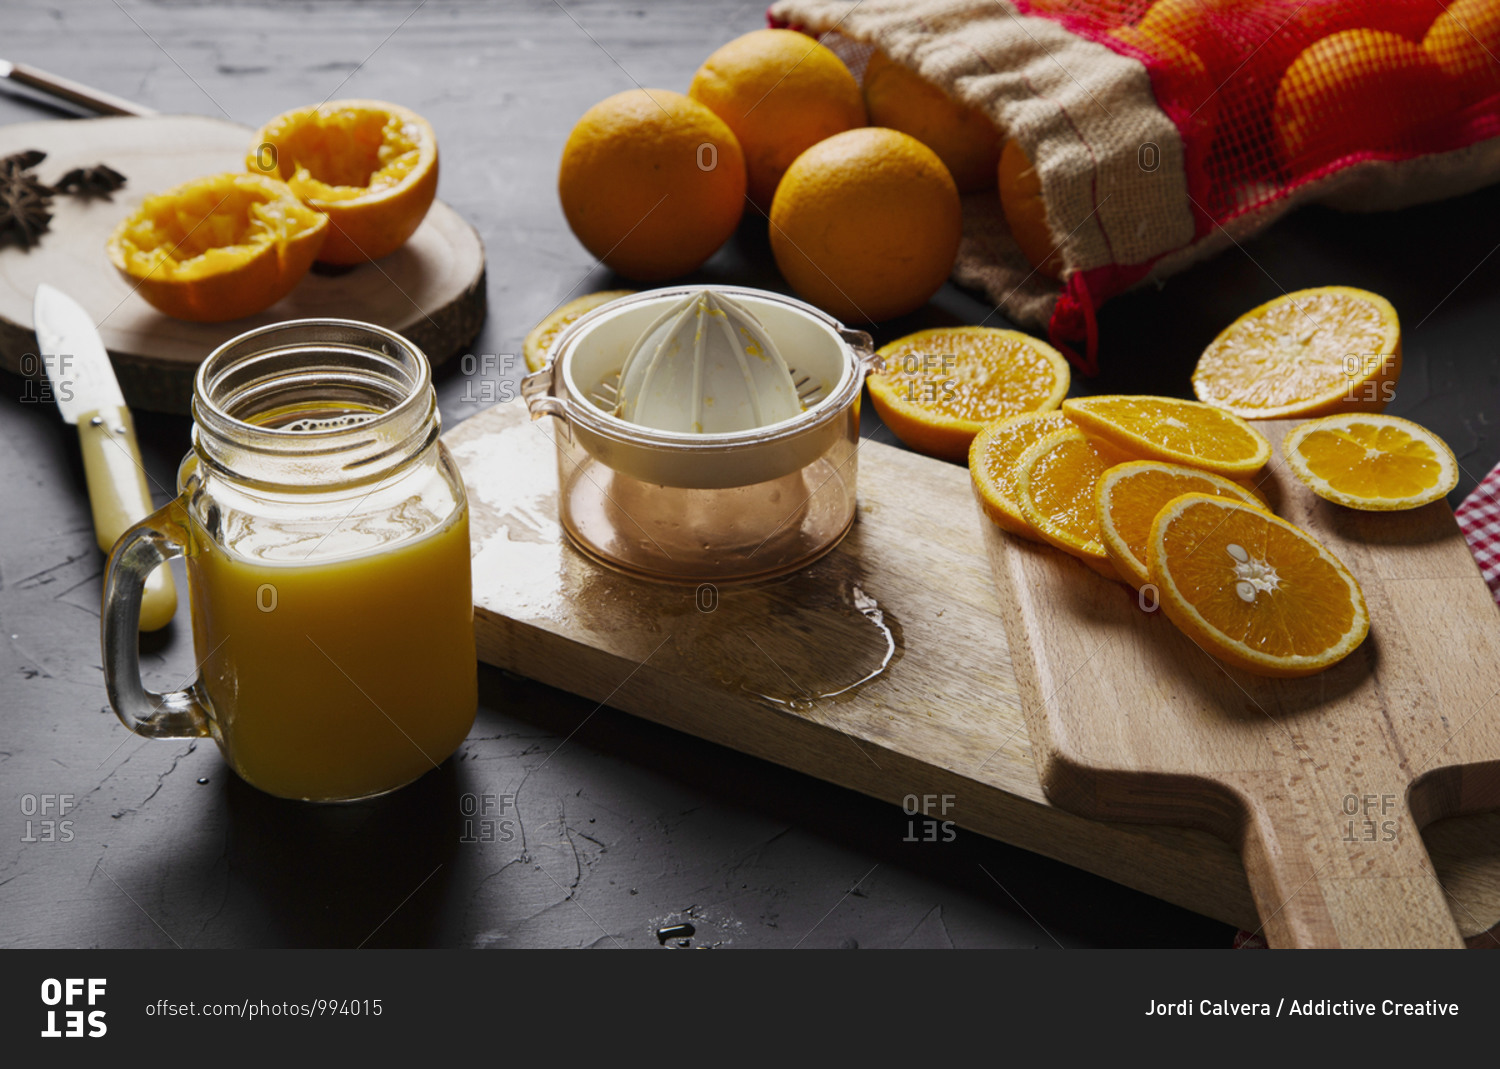 From above composition of halves of fresh oranges on wooden boards and mesh bag near glass jar with orange custard and plastic squeezer